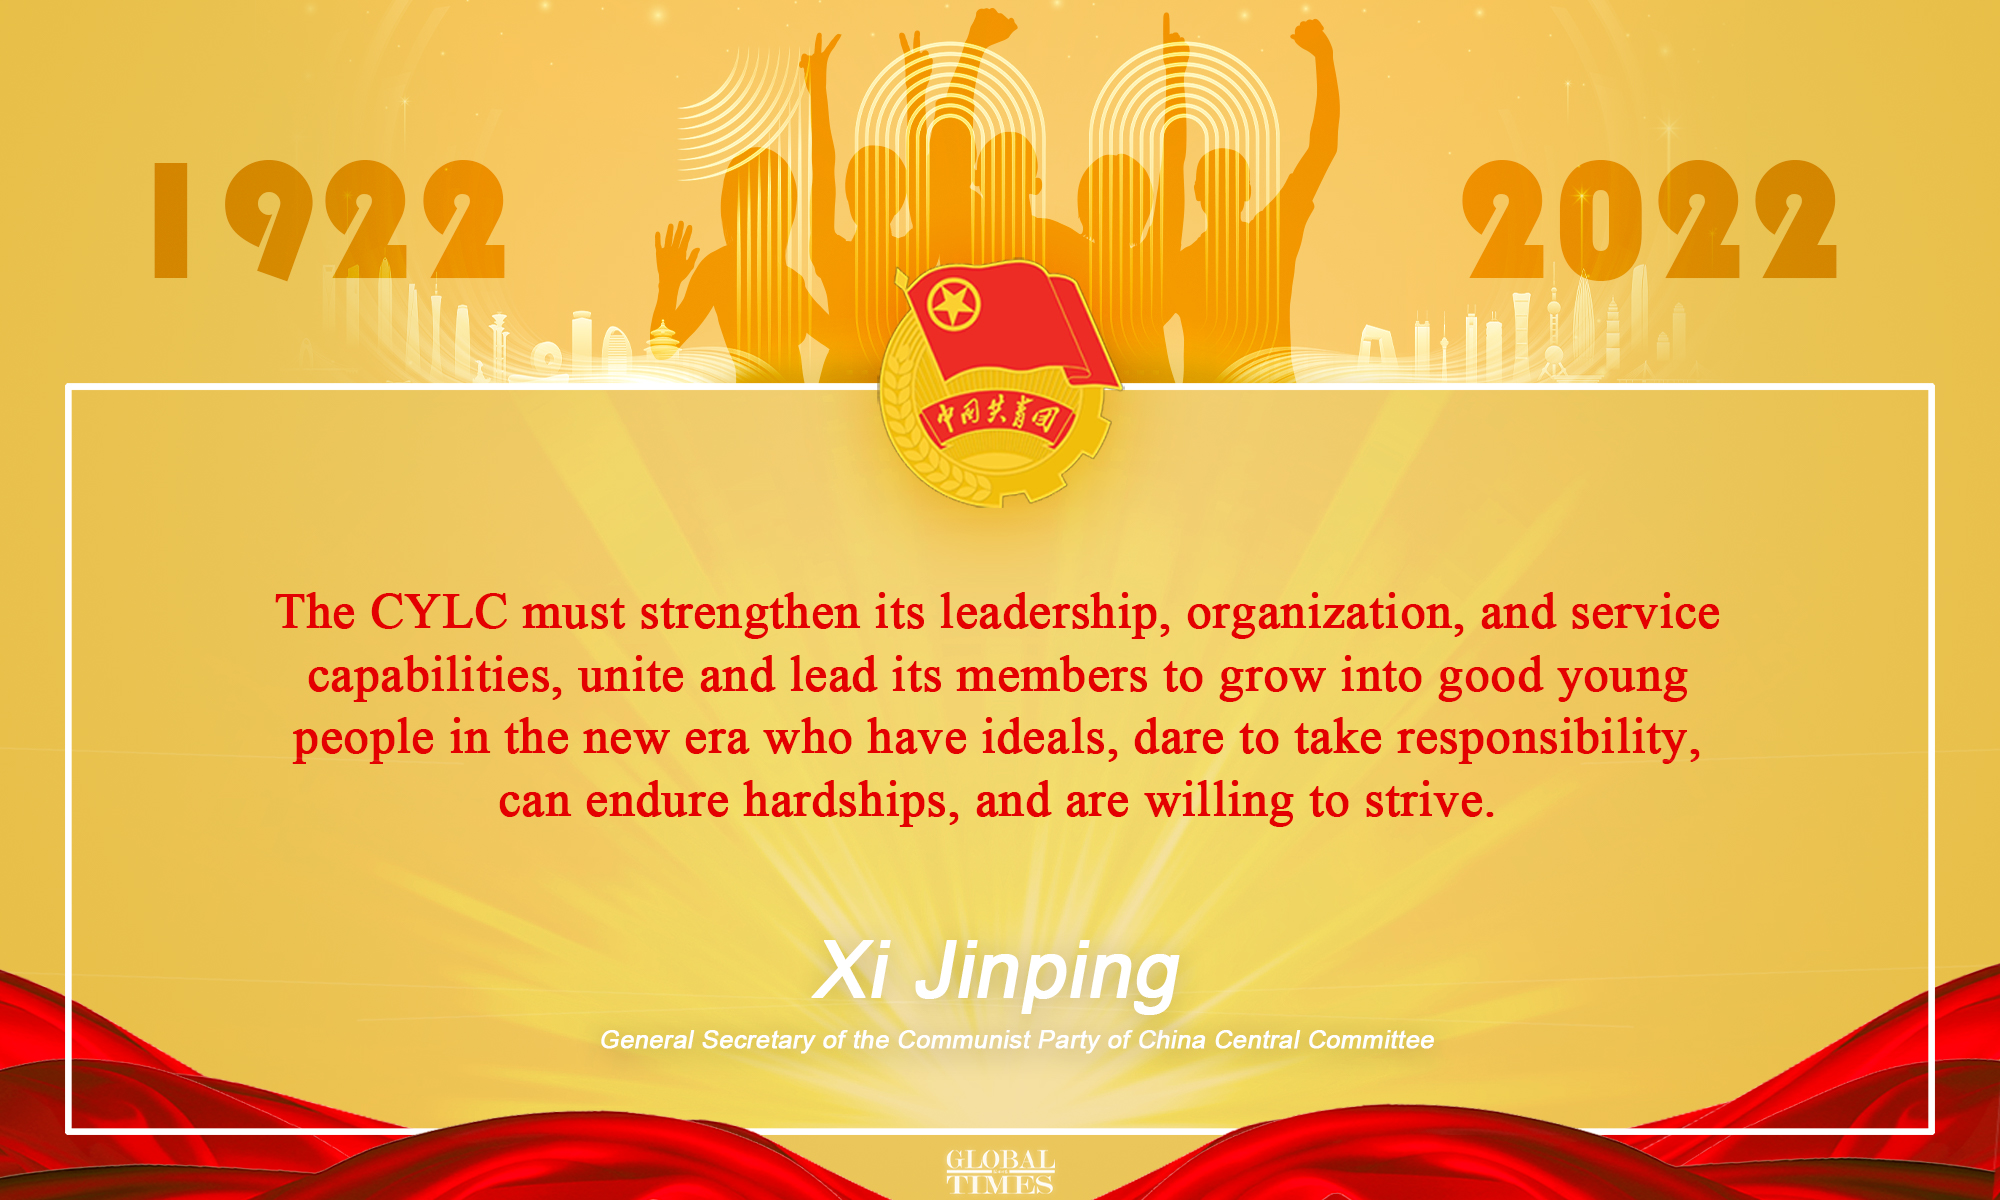 Highlights of Xi's speech at the ceremony marking the centennial of the CYLC's founding. Graphic: GT